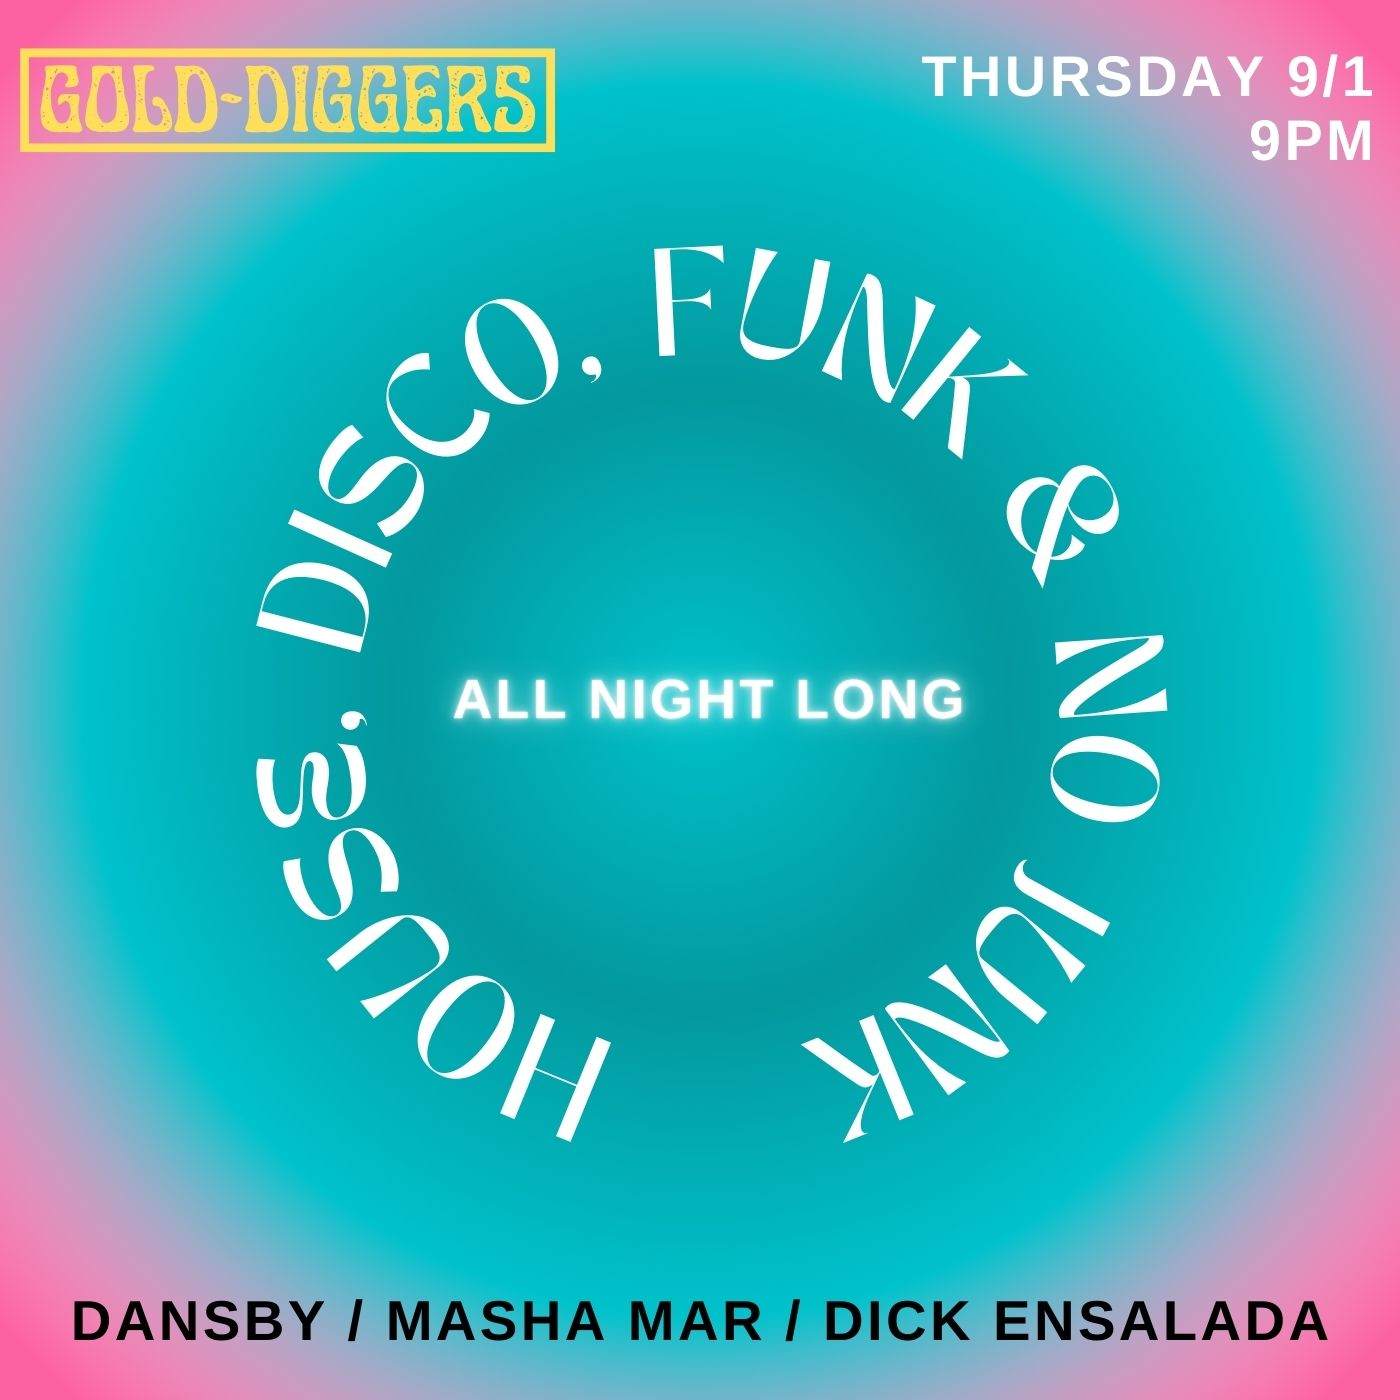 Gold-Diggers, Los Angeles, CA - Booking Information & Music Venue